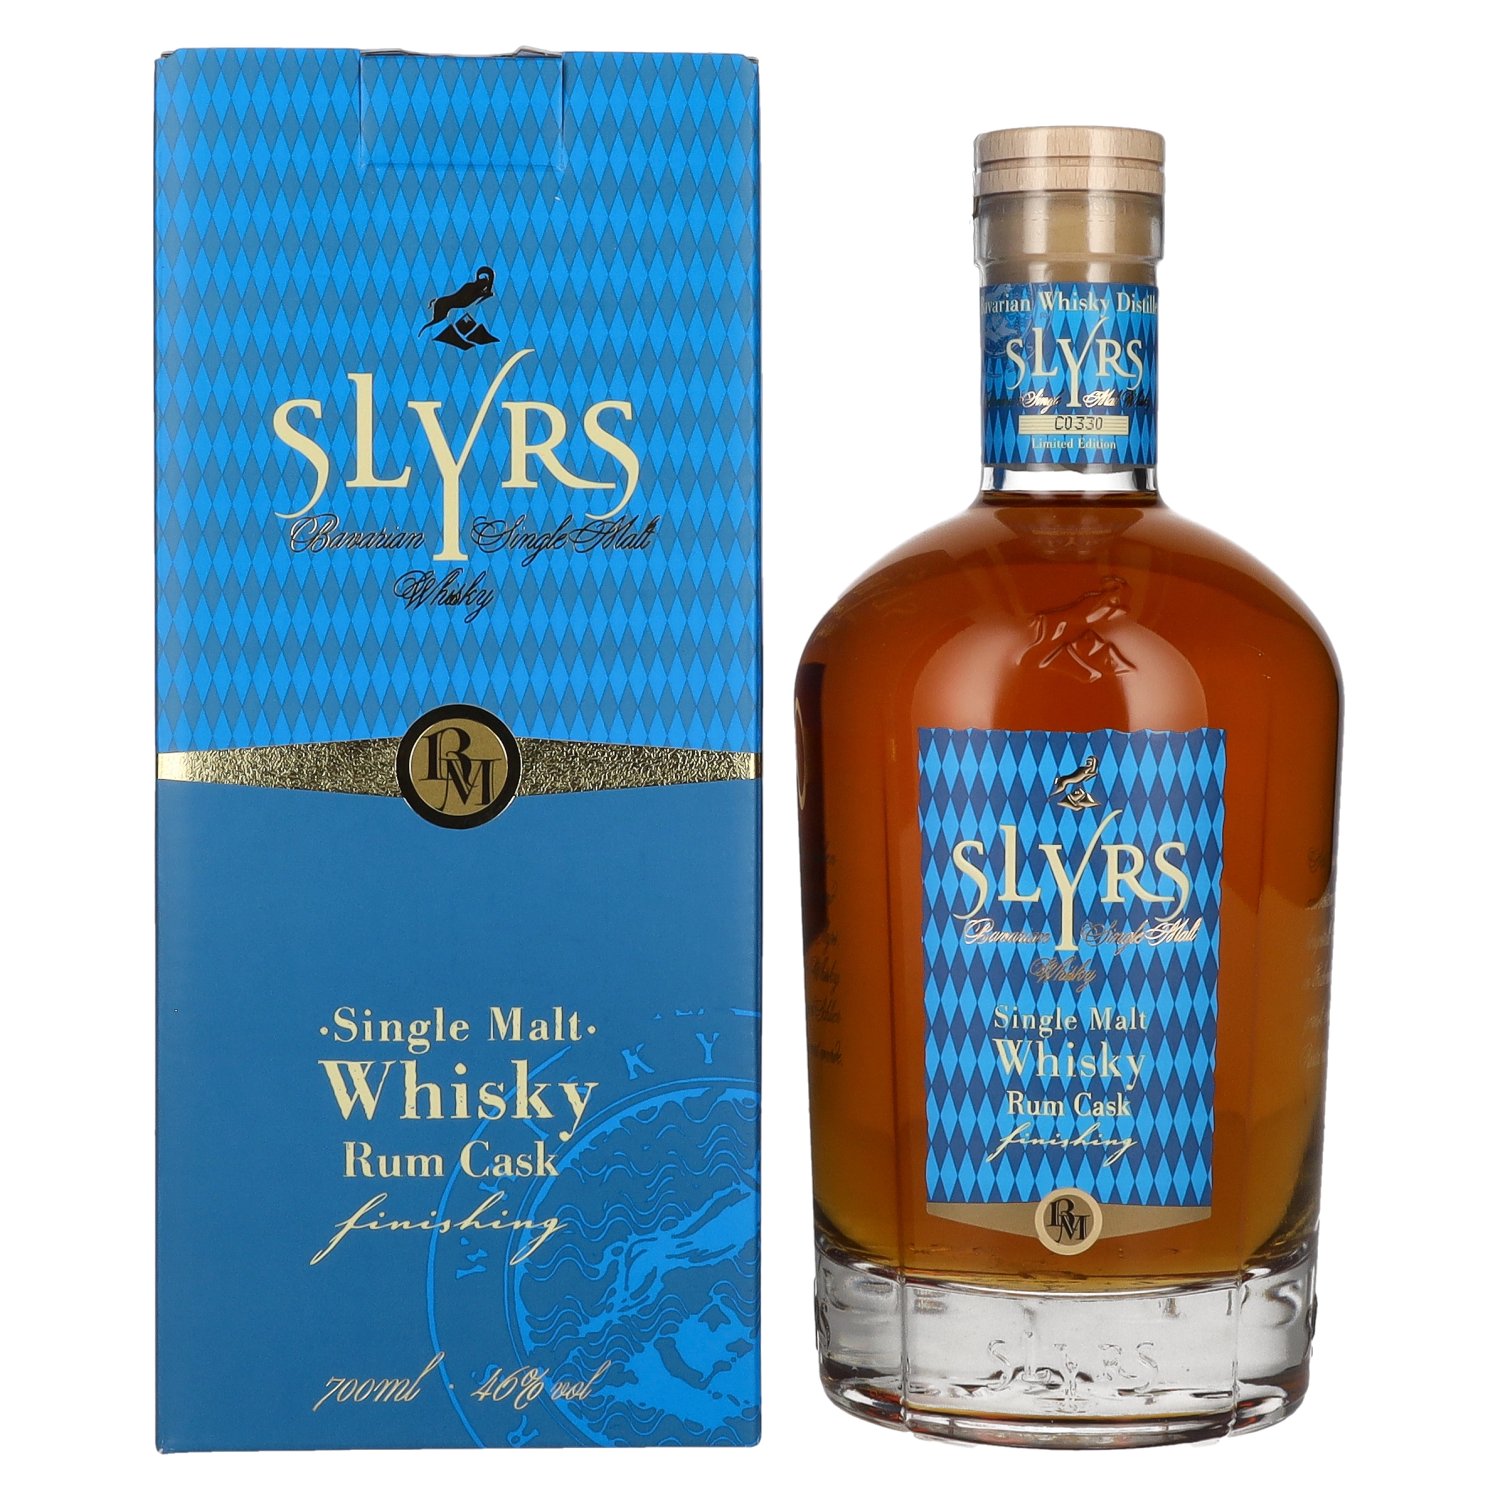 Slyrs RUM CASK FINISH Single Vol. 46% 0,7l Malt in Limited Whisky Edition Giftbox